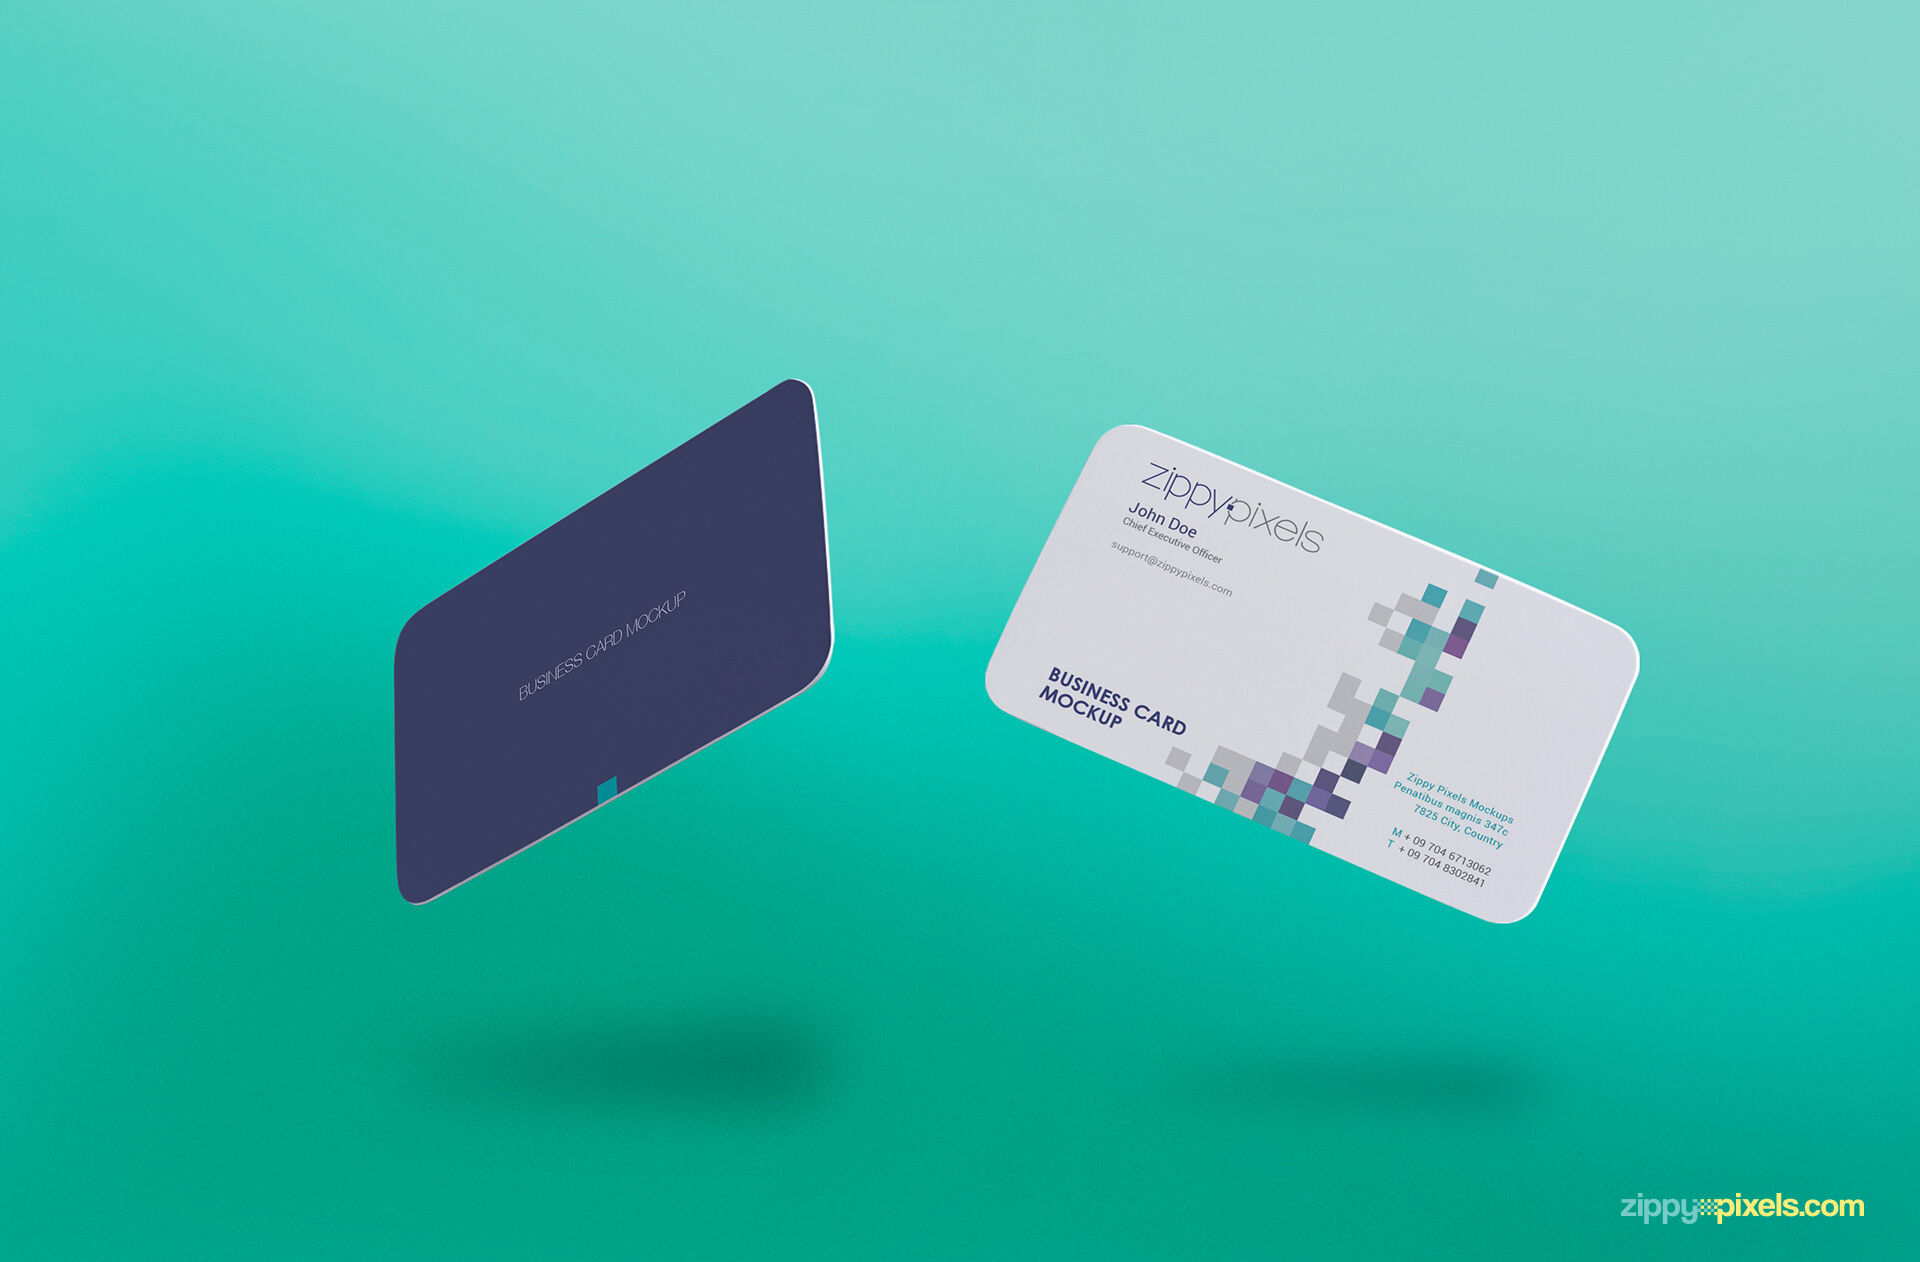 Gravity Business Cards Mockup in Front and Back View FREE PSD